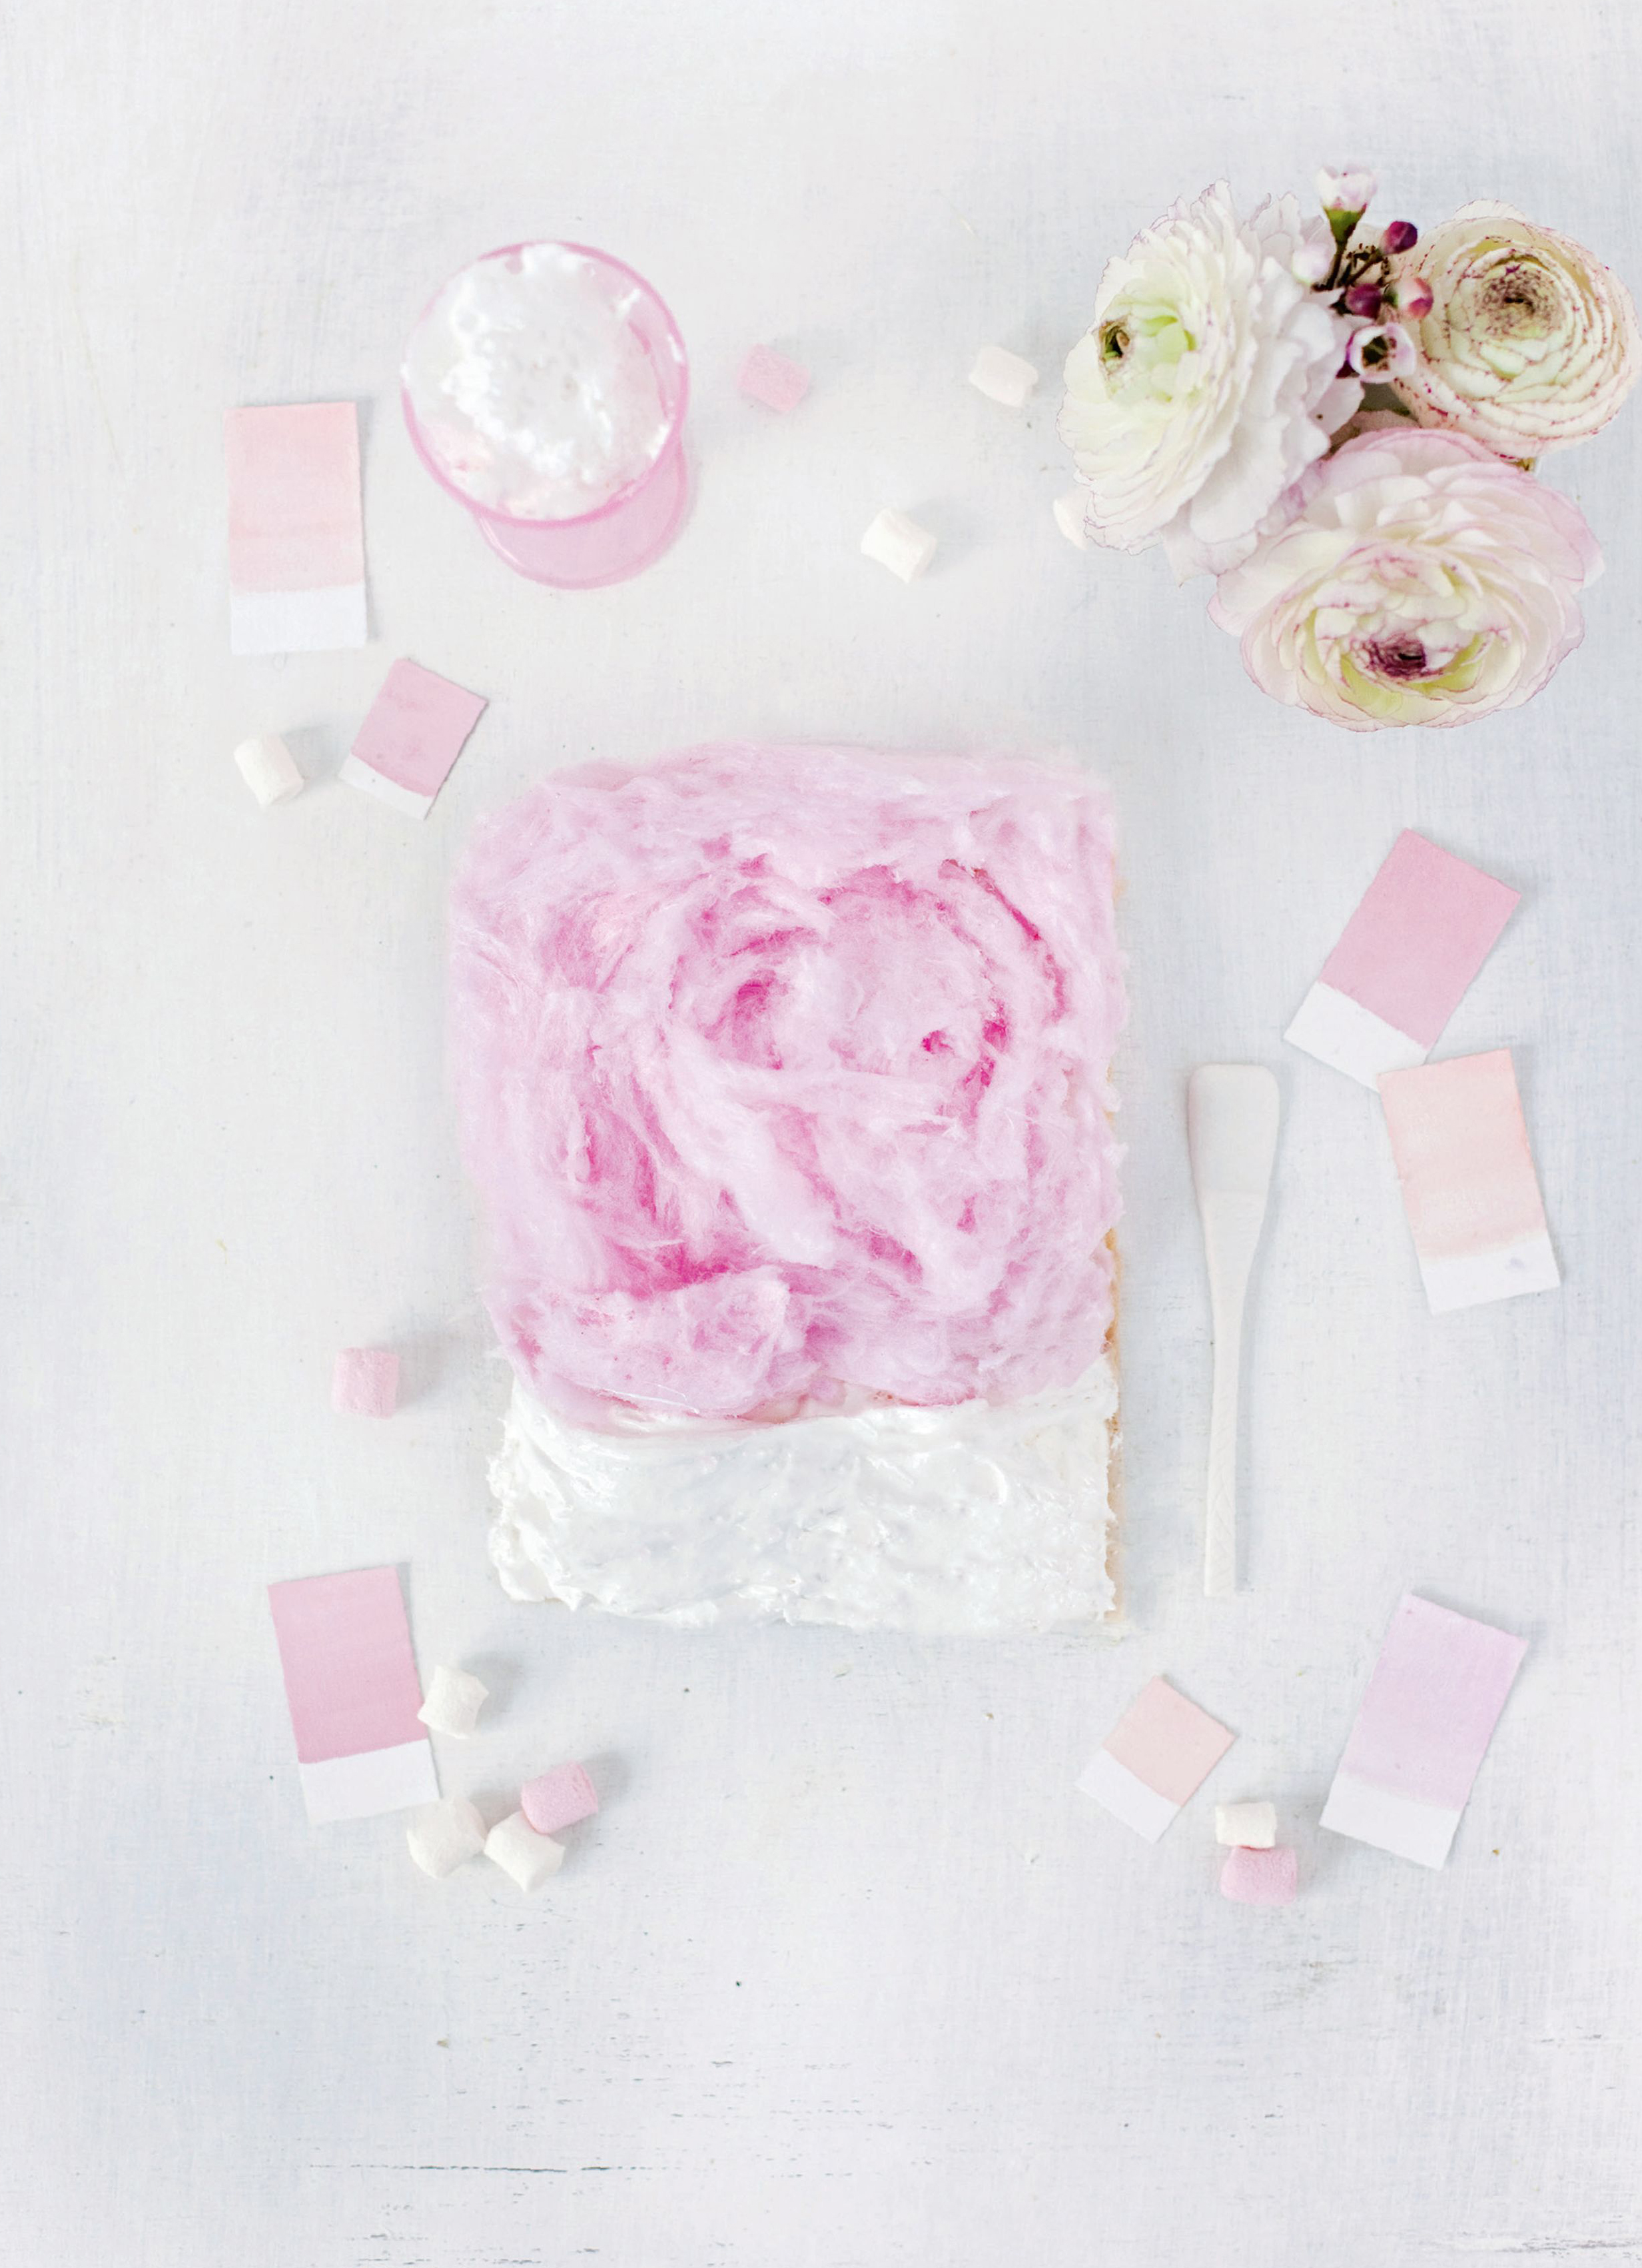 Cotton candy – marshmallow